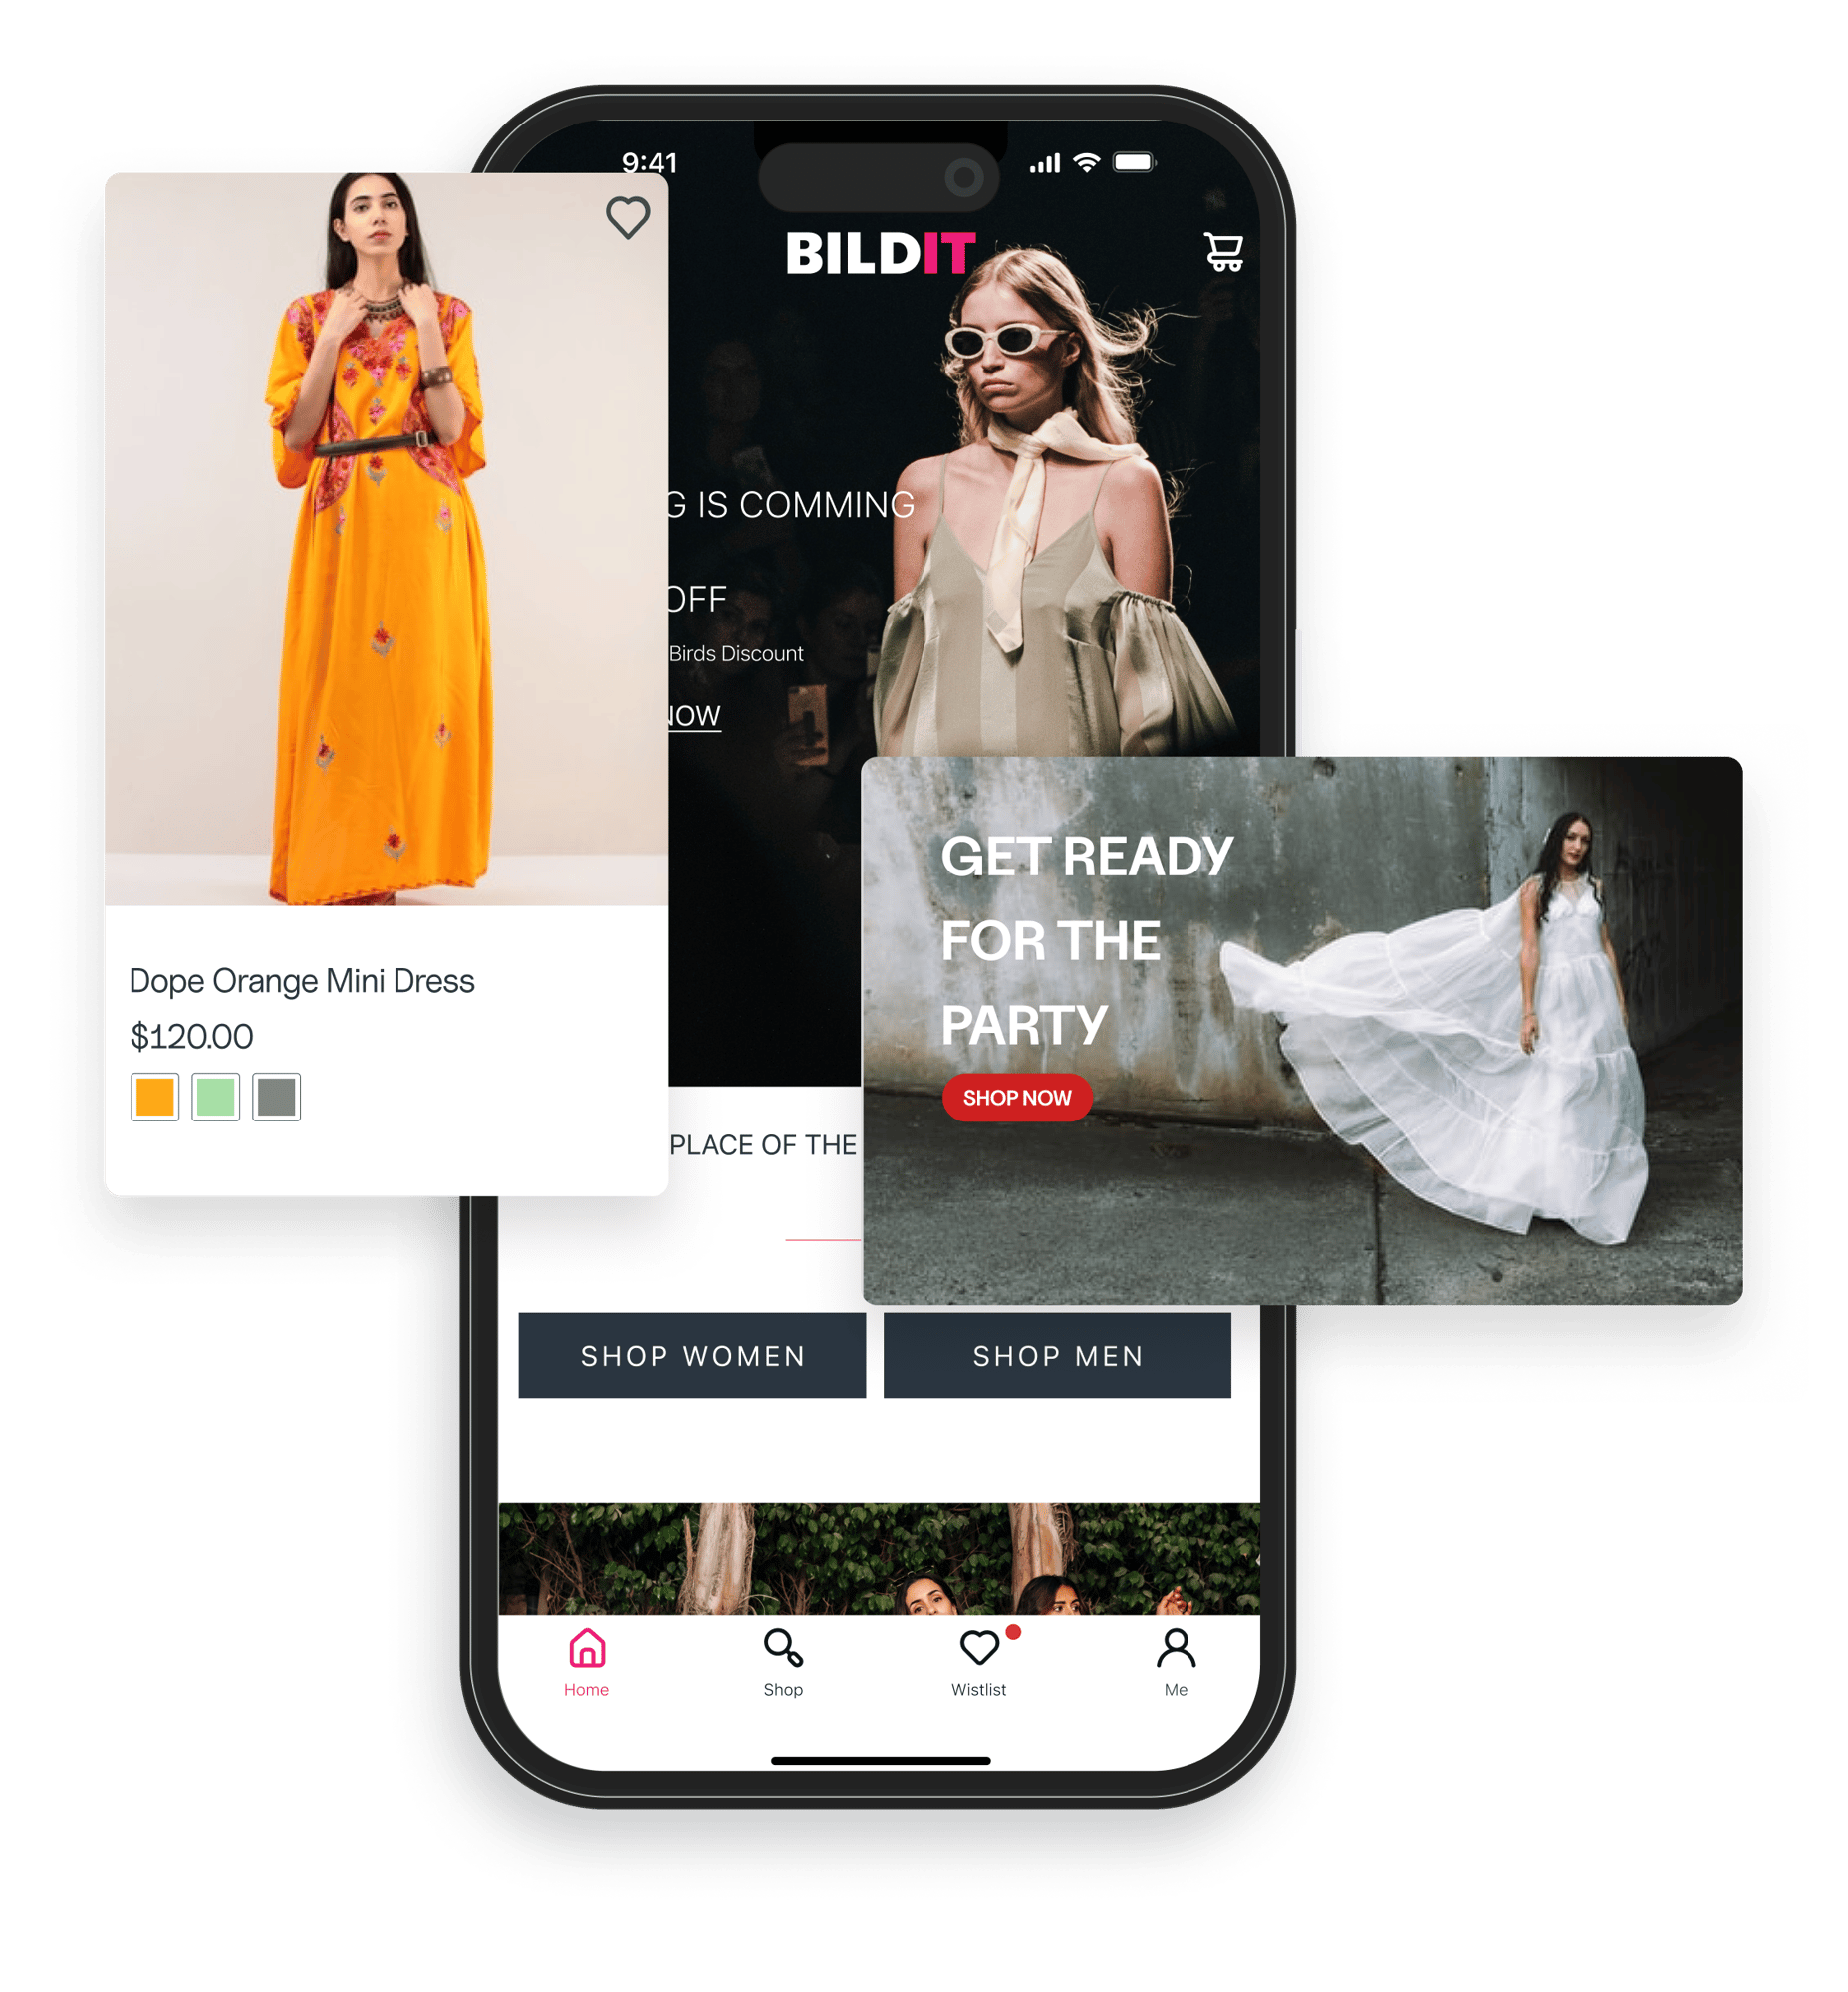 This image shows two smartphones displaying different parts of a fashion e-commerce application. The left phone displays a product detail page for a 'Dope Orange Mini Dress' priced at $120.00, with options to select color and size. The right phone shows a promotional banner with the text 